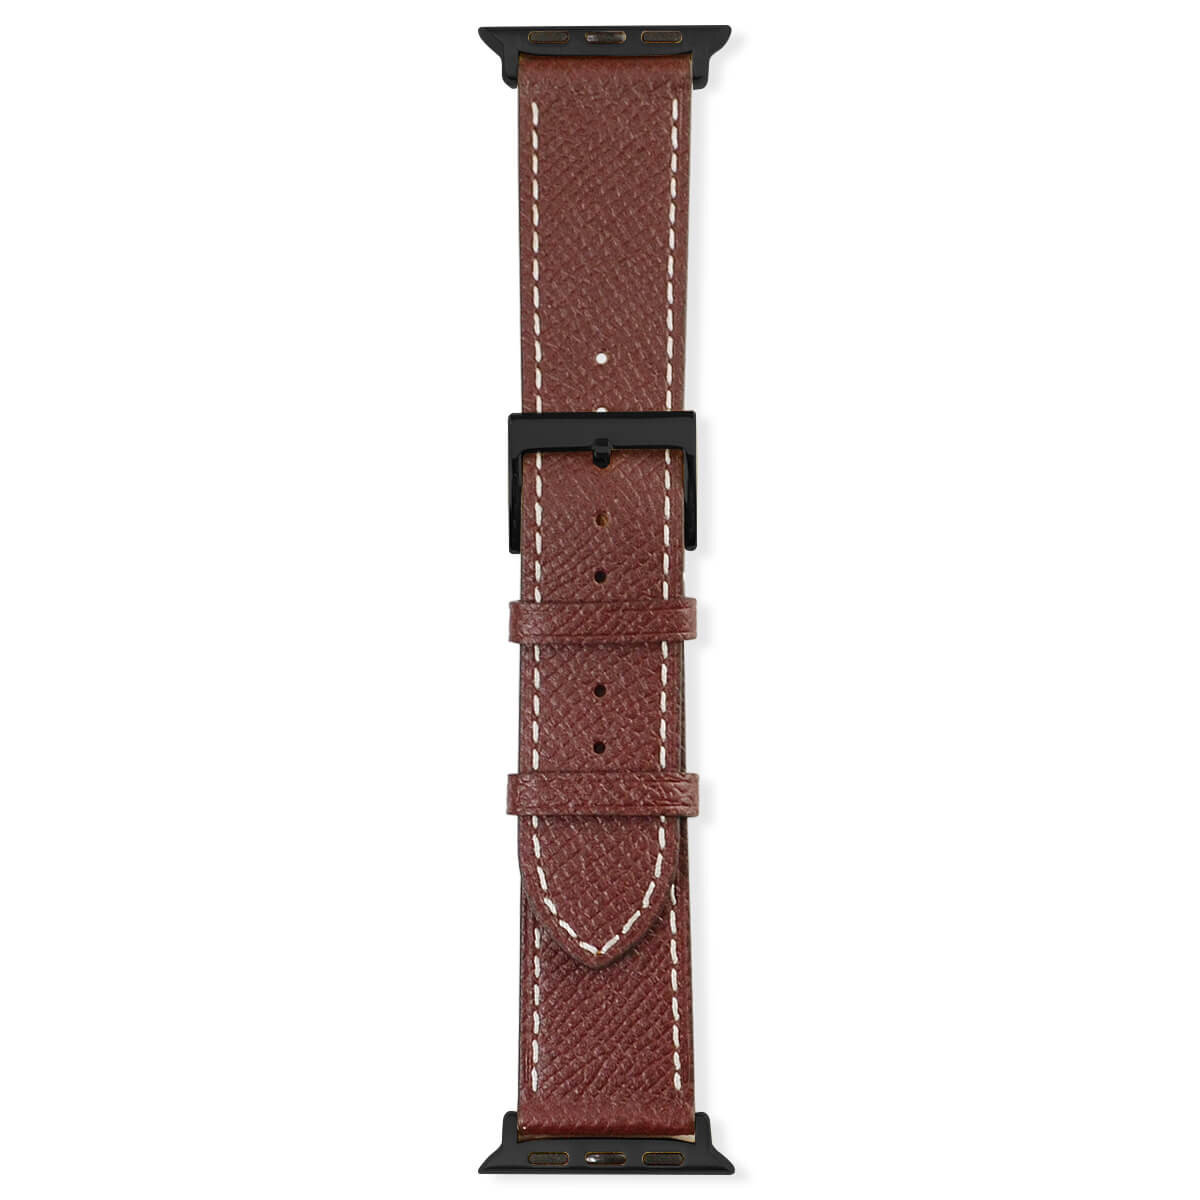 42mm/44mm/45mm/49mm Apple Watch Strap Calf Leather Band (Red Brown)